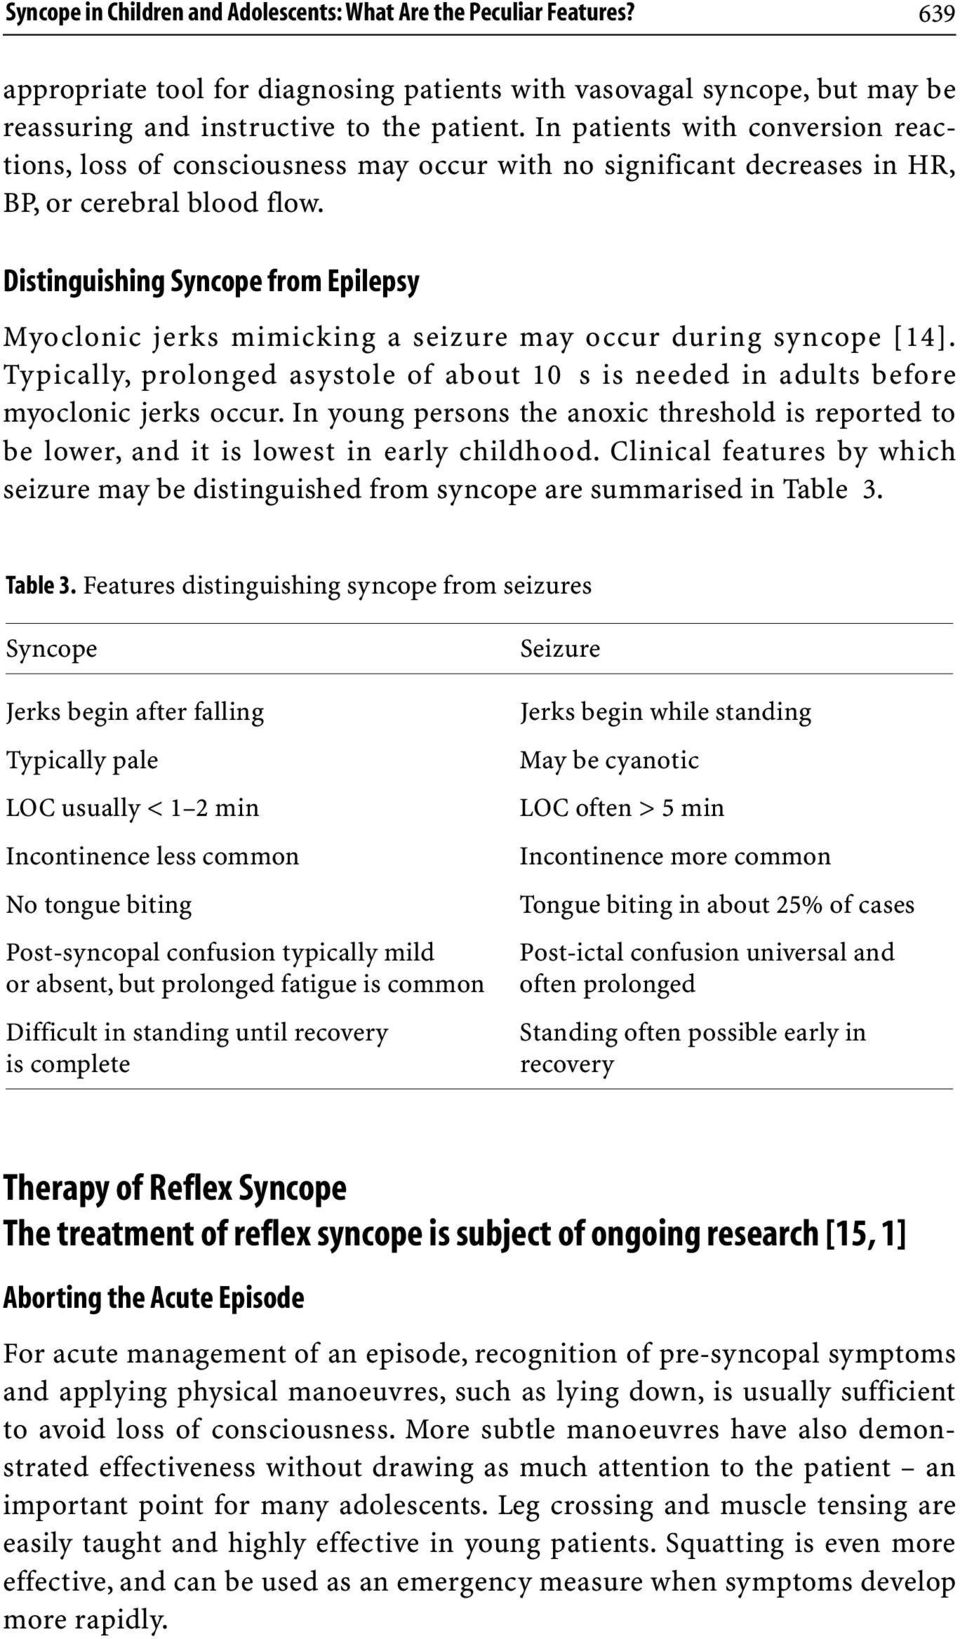 Distinguishing Syncope from Epilepsy Myoclonic jerks mimicking a seizure may occur during syncope [14]. Typically, prolonged asystole of about 10 s is needed in adults before myoclonic jerks occur.